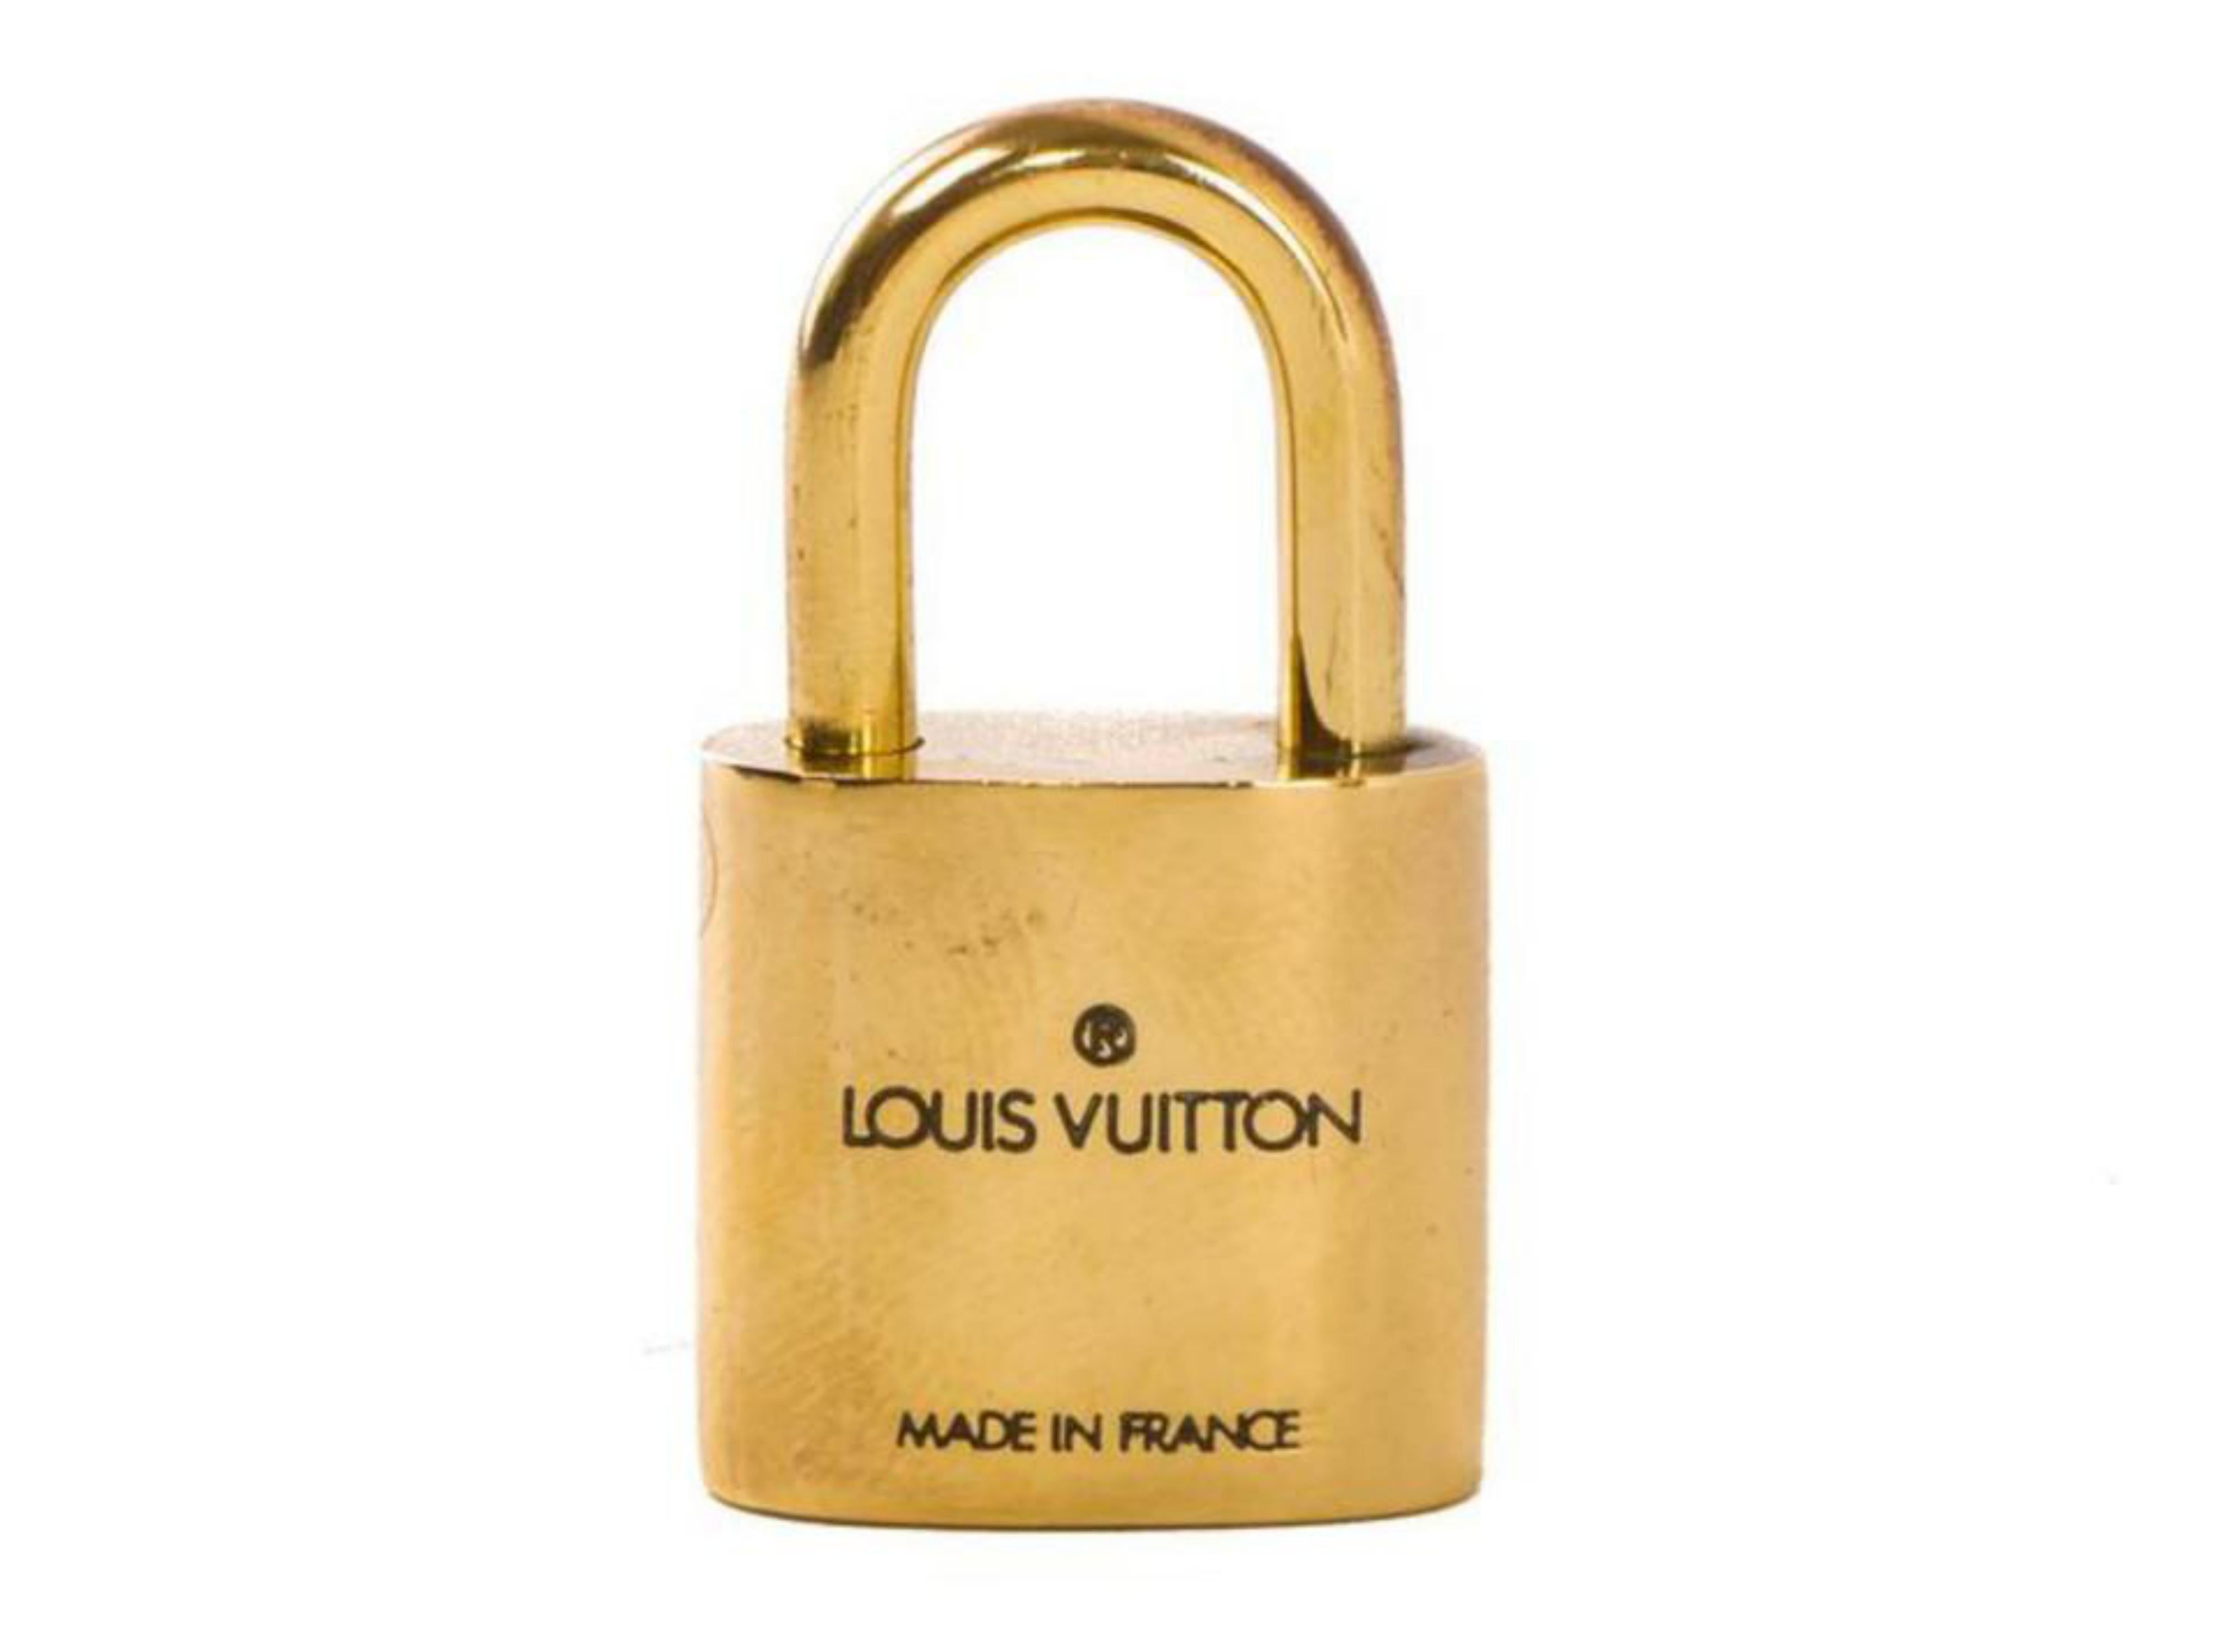 Louis Vuitton Gold Single Key Lock Pad Lock and Key 867698 For Sale 2